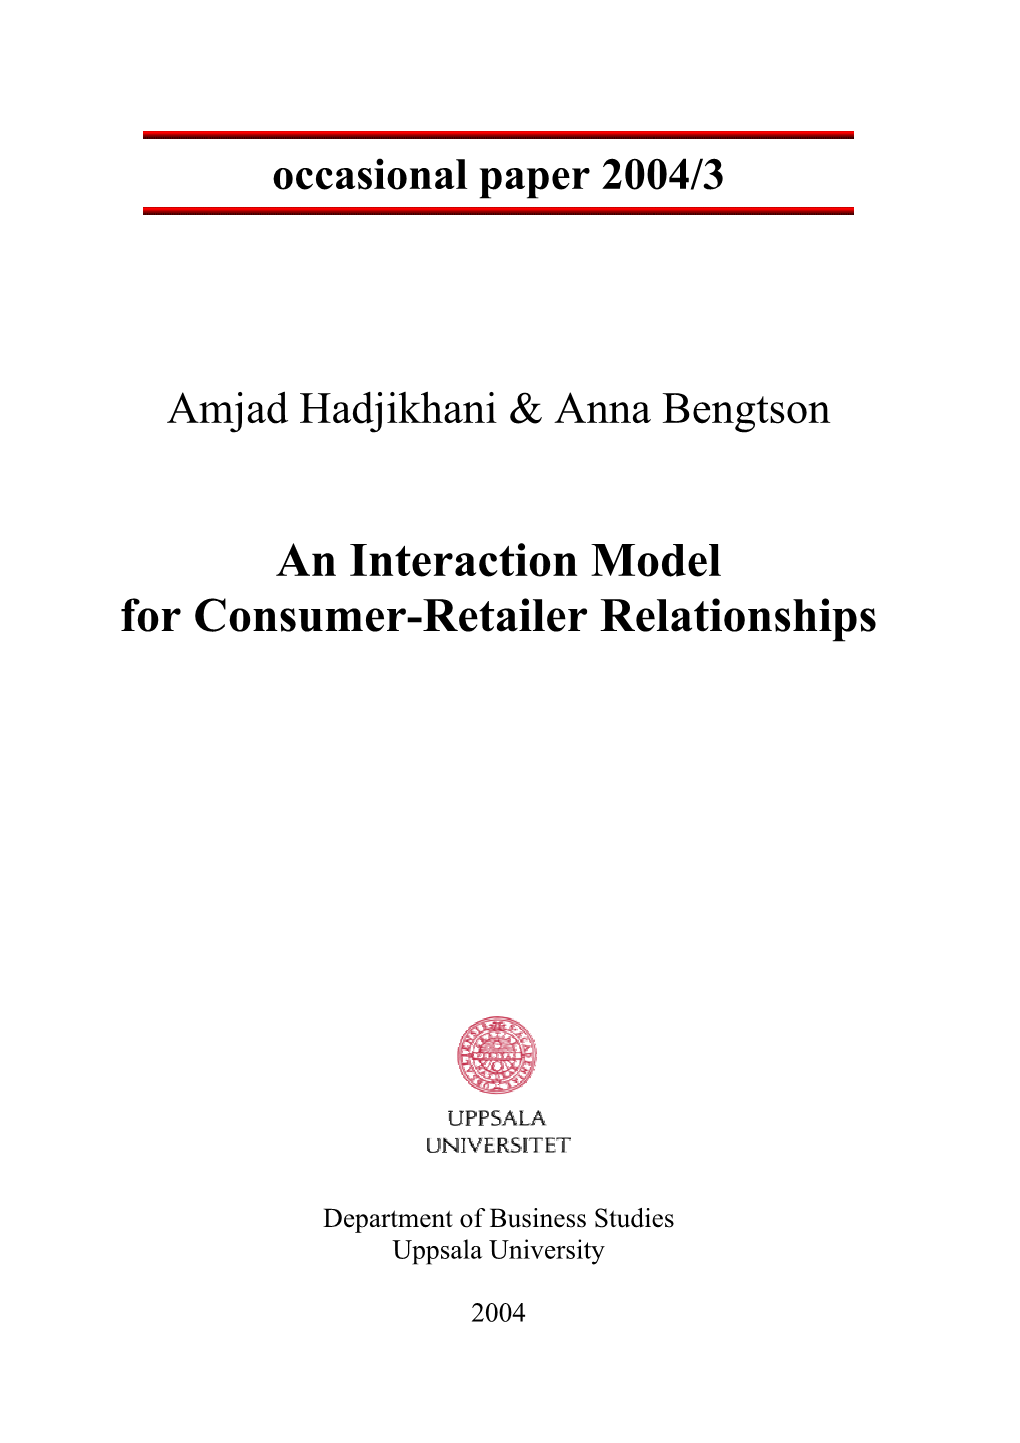 An Interaction Model for Consumer-Retailer Relationships